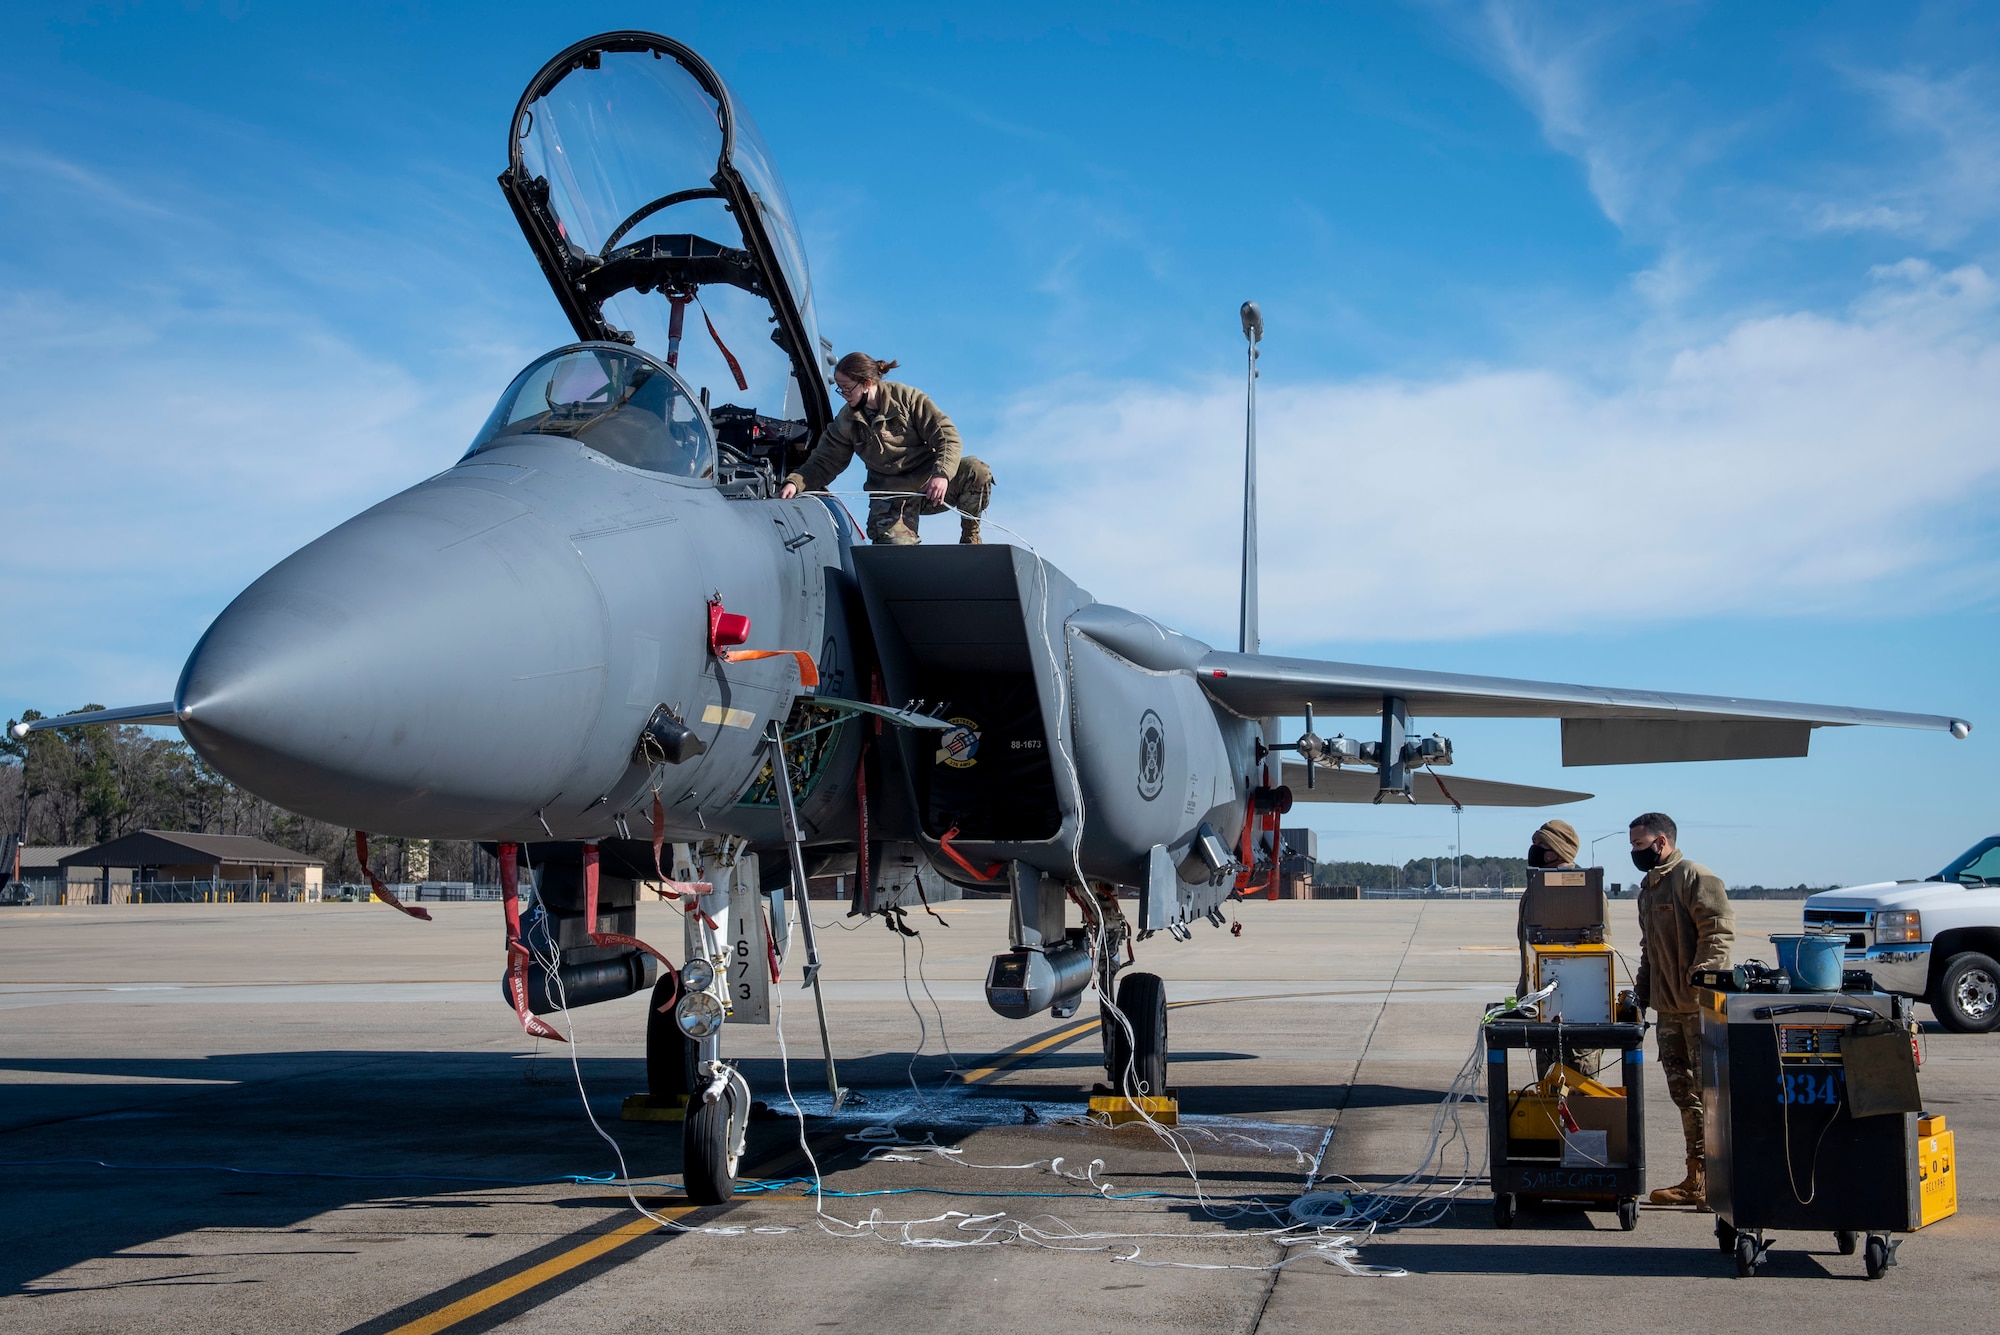 Senior Airman Kierra Hamil (left), 4th Component Maintenance Squadron electrical and environmental technician, connects a test harness to an F-15E Strike Eagle while Airman 1st Class Quentin Thompson (middle), 4th CMS electrical and environmental technician, and Senior Airman Thiago Santos (right), 4th Fighter Readiness Squadron electronics technician, set up an Eclypse tester program at Seymour Johnson Air Force Base, North Carolina, Feb. 3, 2021.